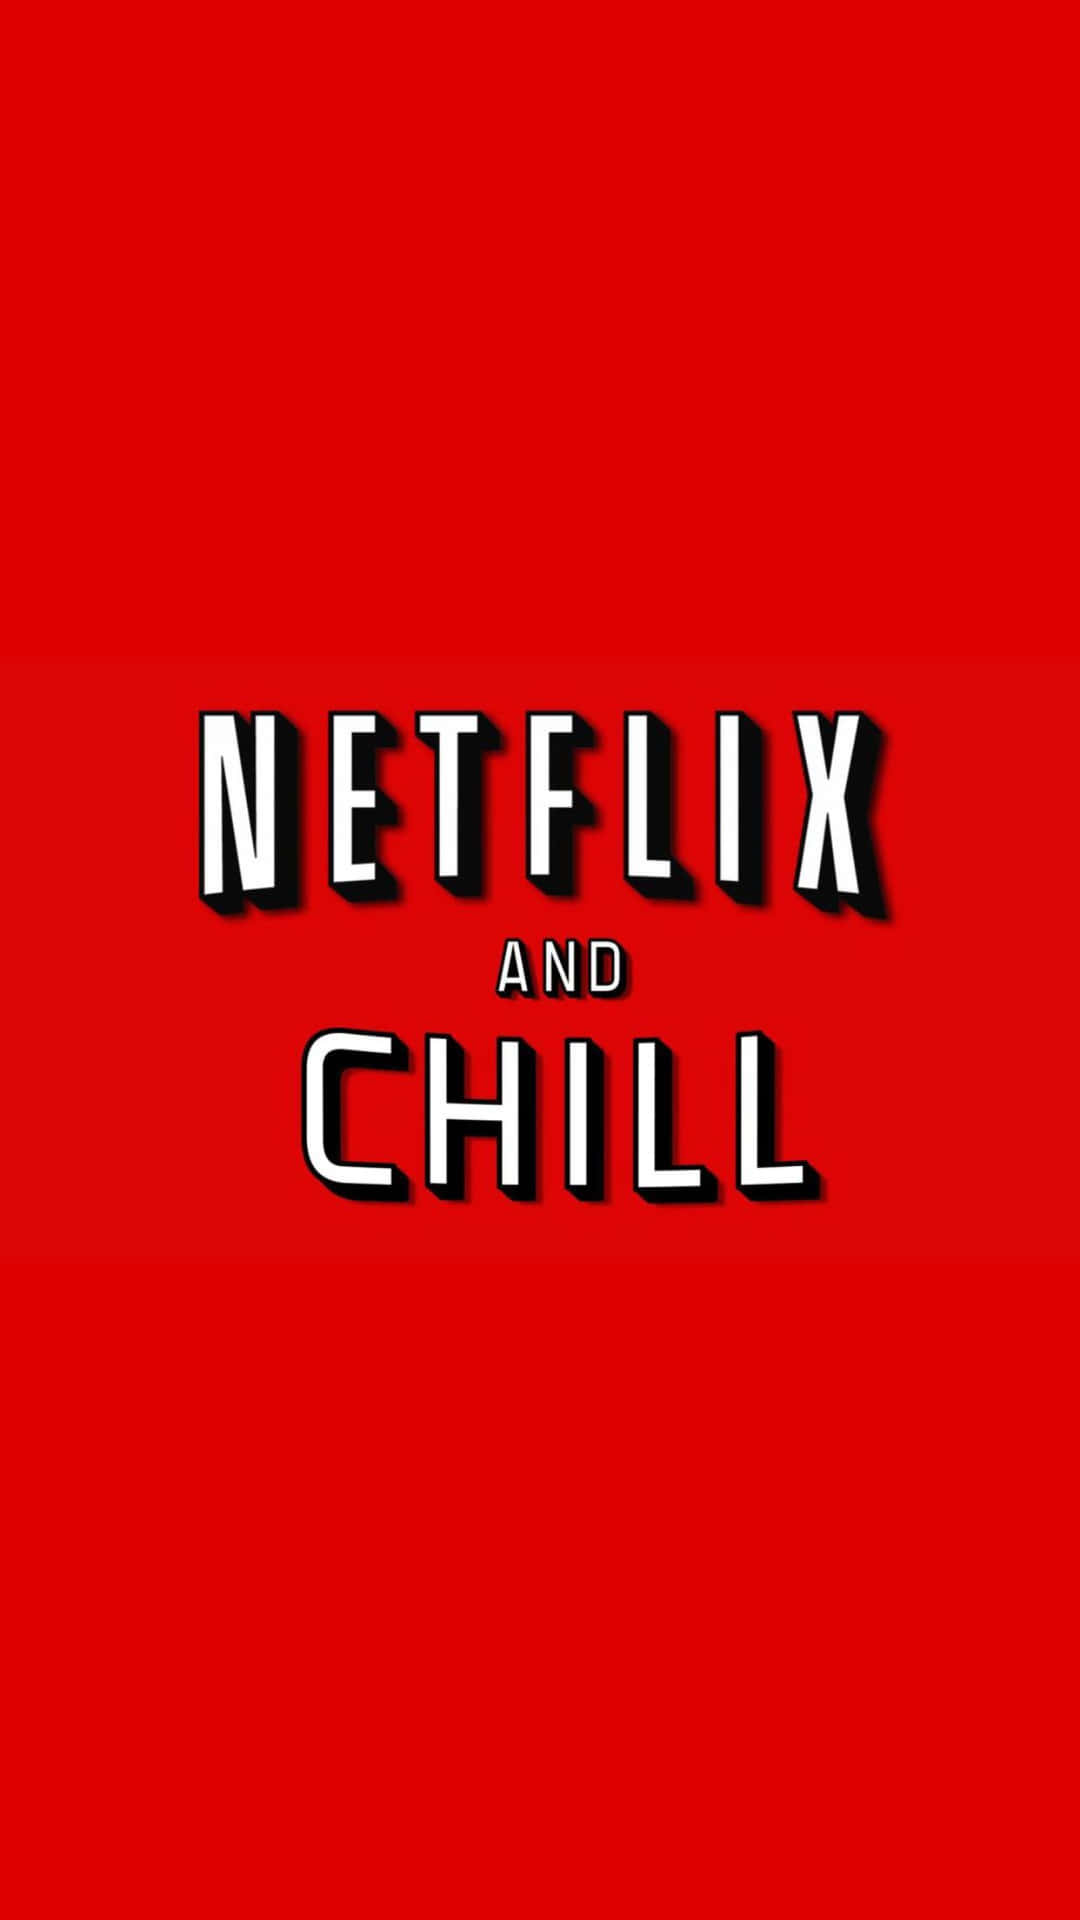 Netflix And Chill Aesthetic